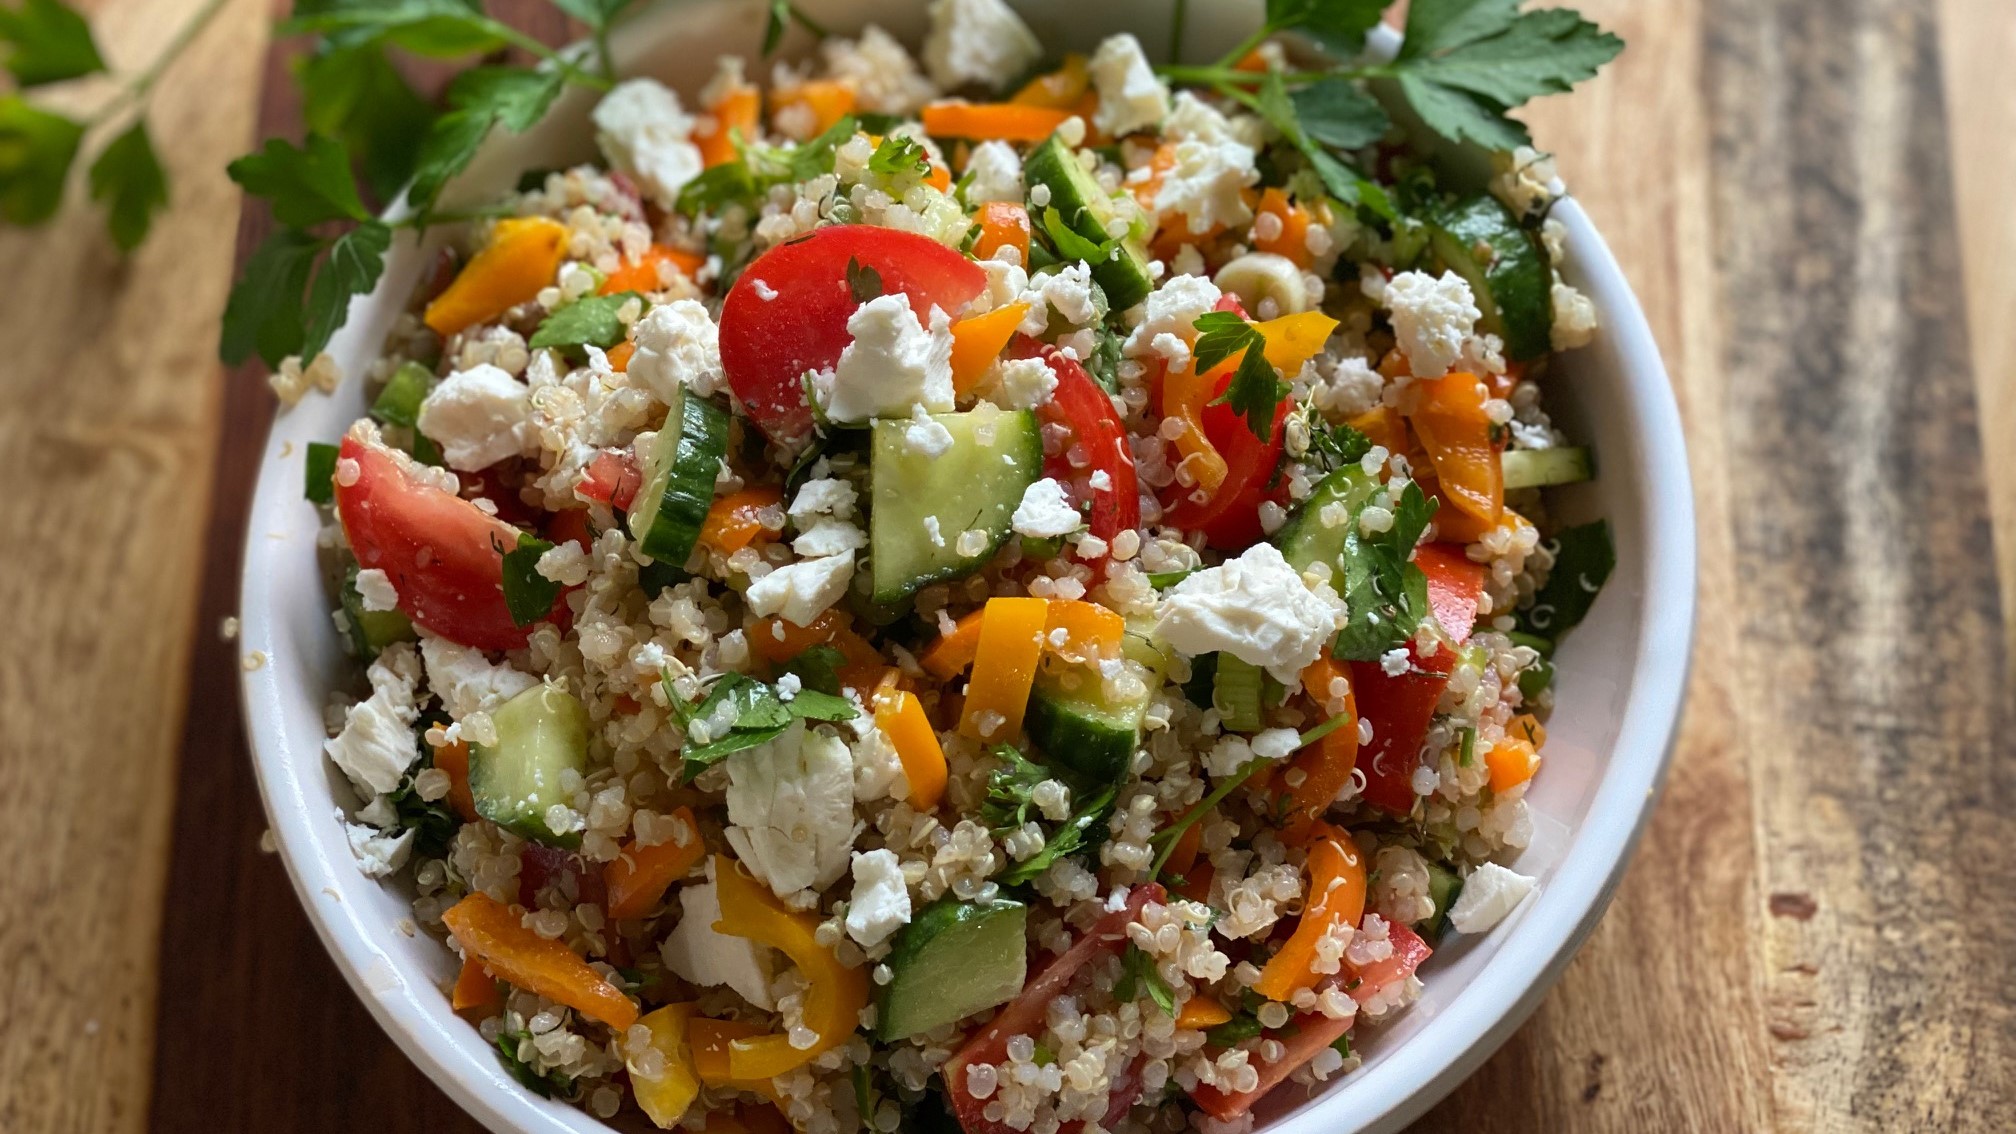 How To Make A Tasty Quick Mediterranean Quinoa Salad – Mindfully Aware ...